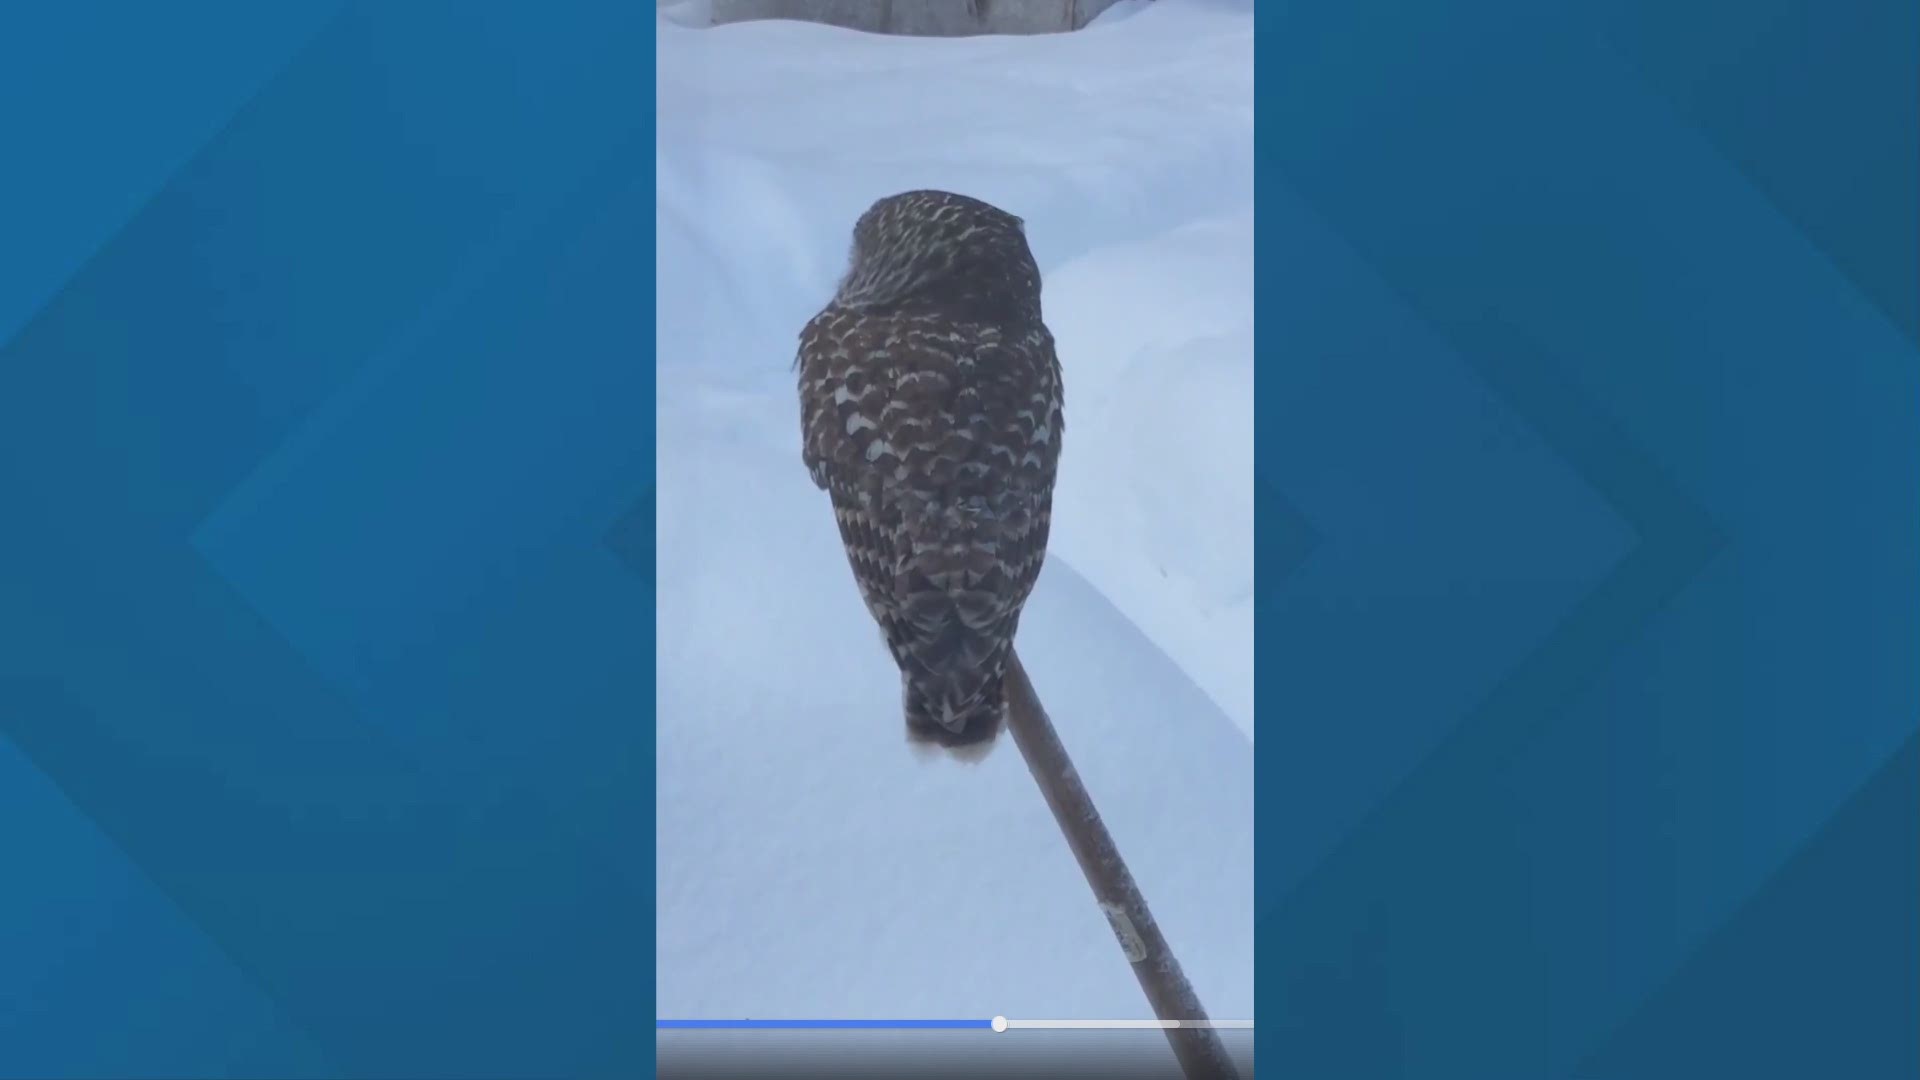 For the last two weeks, a woman from Rome, Maine says what looks like a barred owl has been visiting her every day.